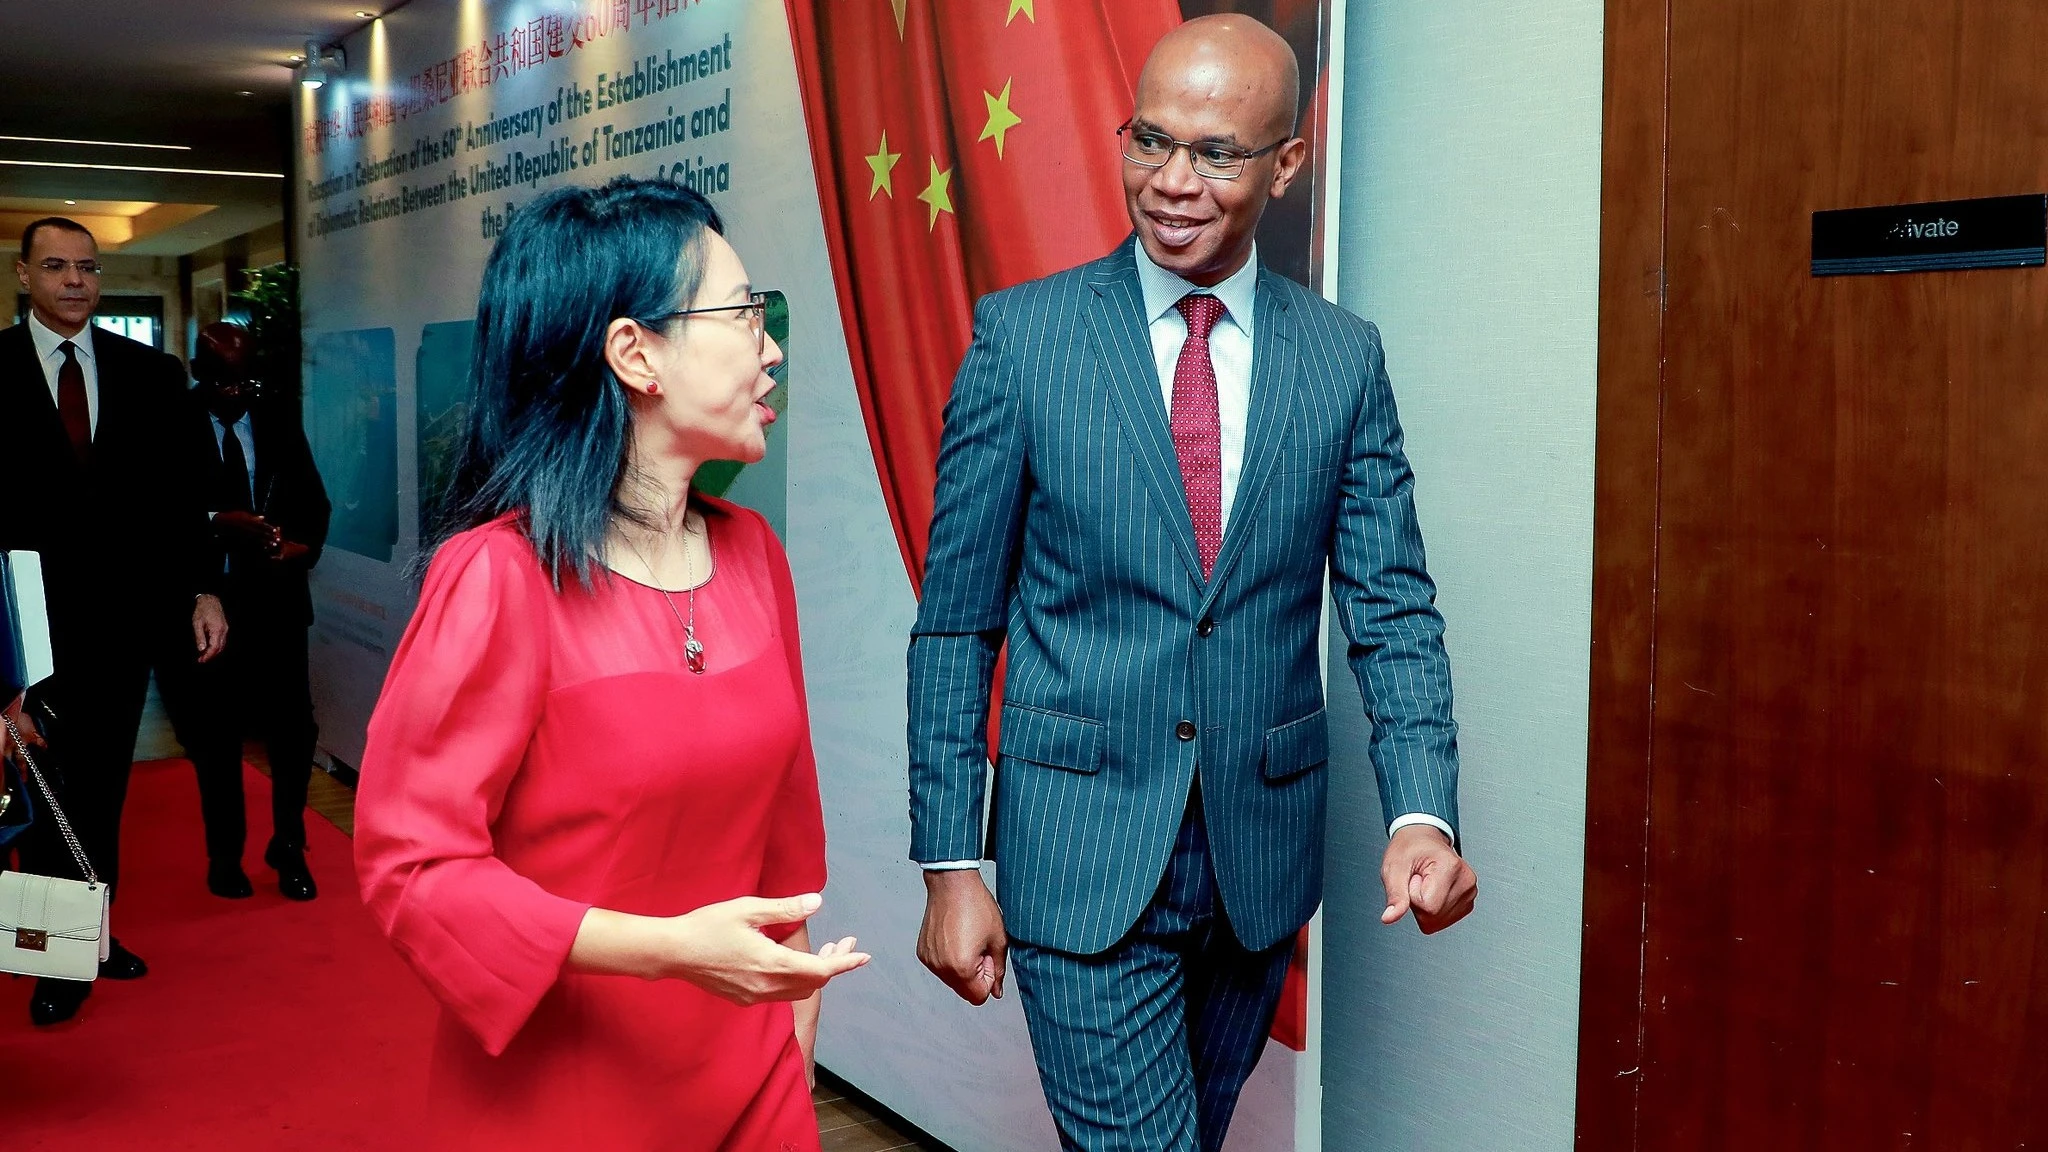 Minister for Foreign Affairs and East African Cooperation January Makamba shares a light moment with the Chinese Ambassador to Tanzania Chen Mingjian during the 60th anniversary of diplomatic relationship establishment of Tanzania and China 